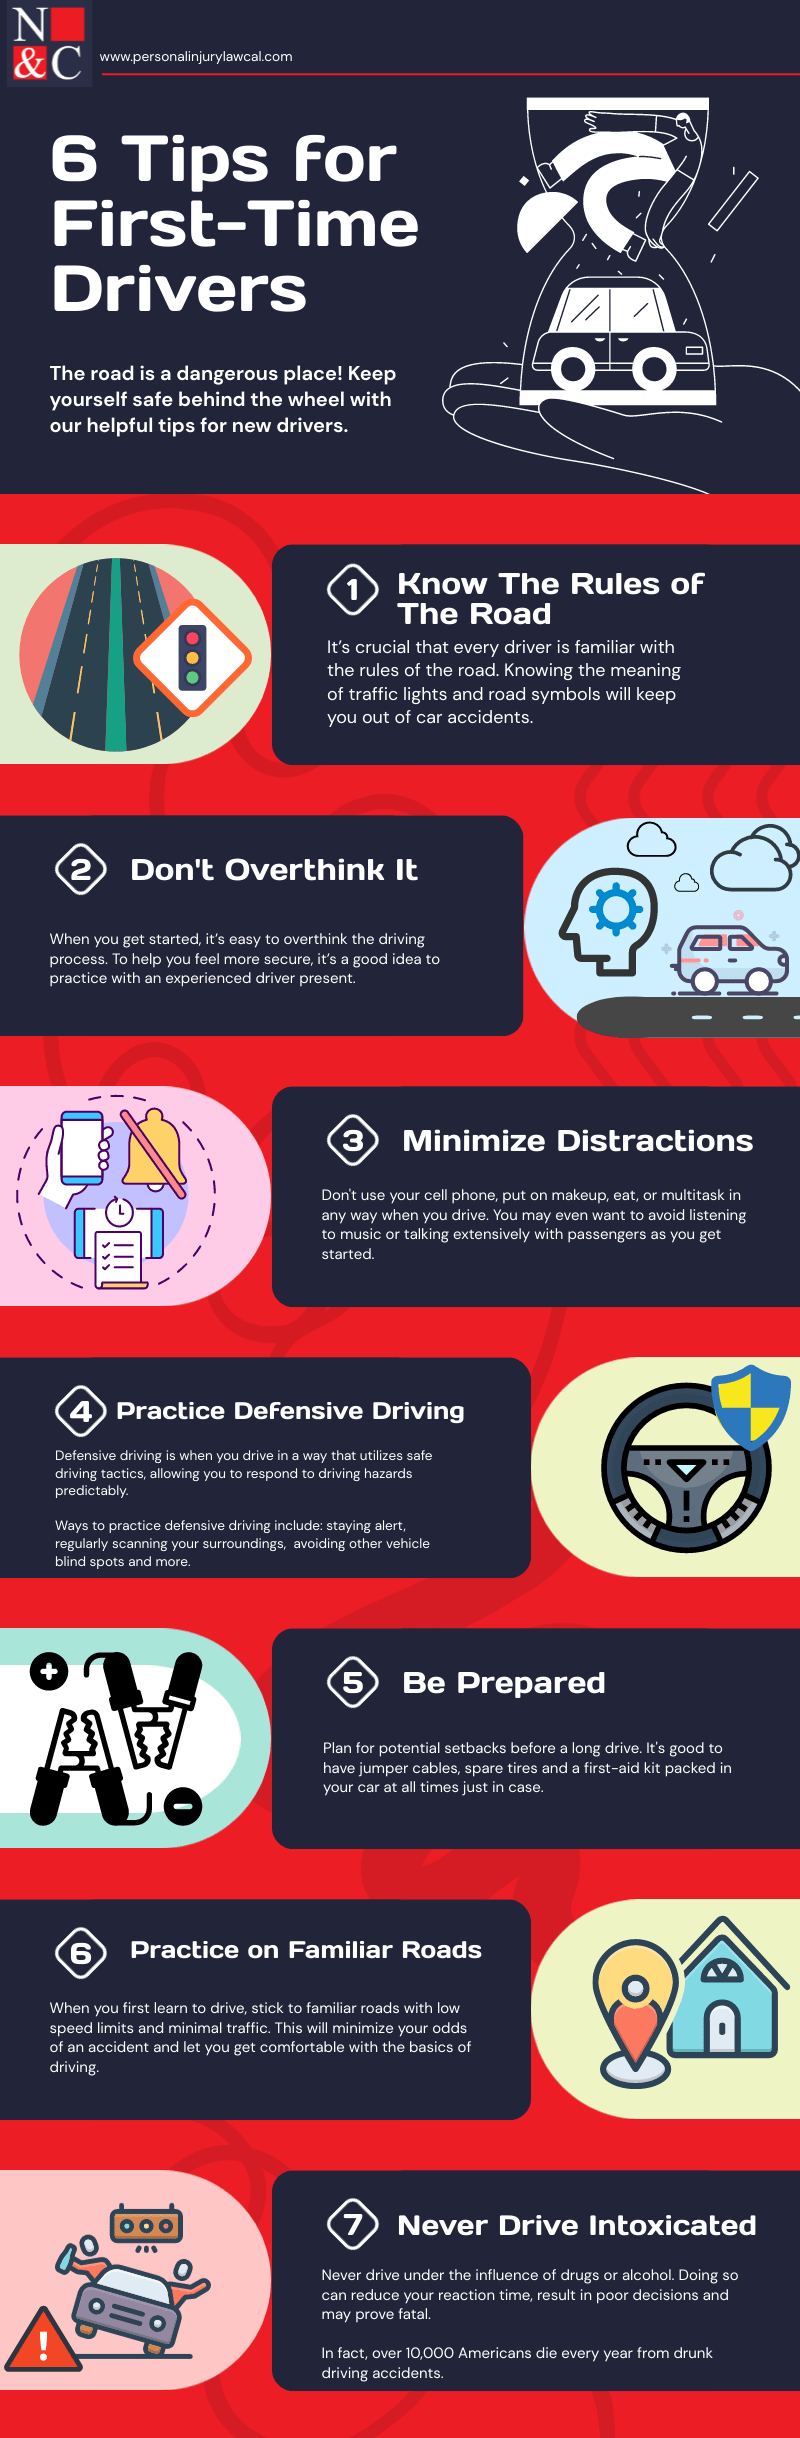 Tips for first time drivers to drive responsibly.